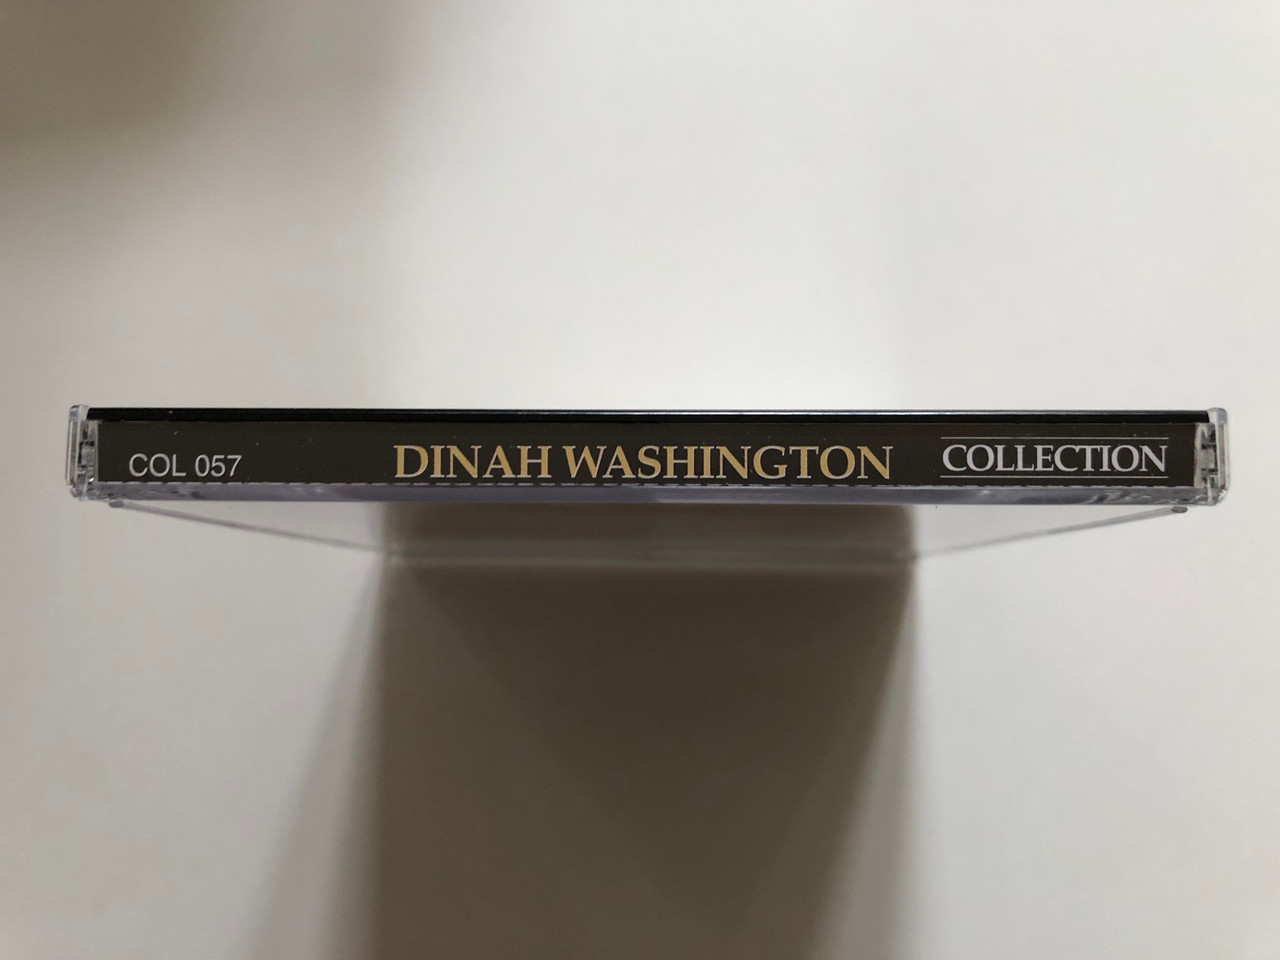 https://cdn10.bigcommerce.com/s-62bdpkt7pb/products/0/images/310589/Dinah_Washington_Collection_25_Songs_The_Collection_Audio_CD_1994_COL057_3__40383.1699391946.1280.1280.JPG?c=2